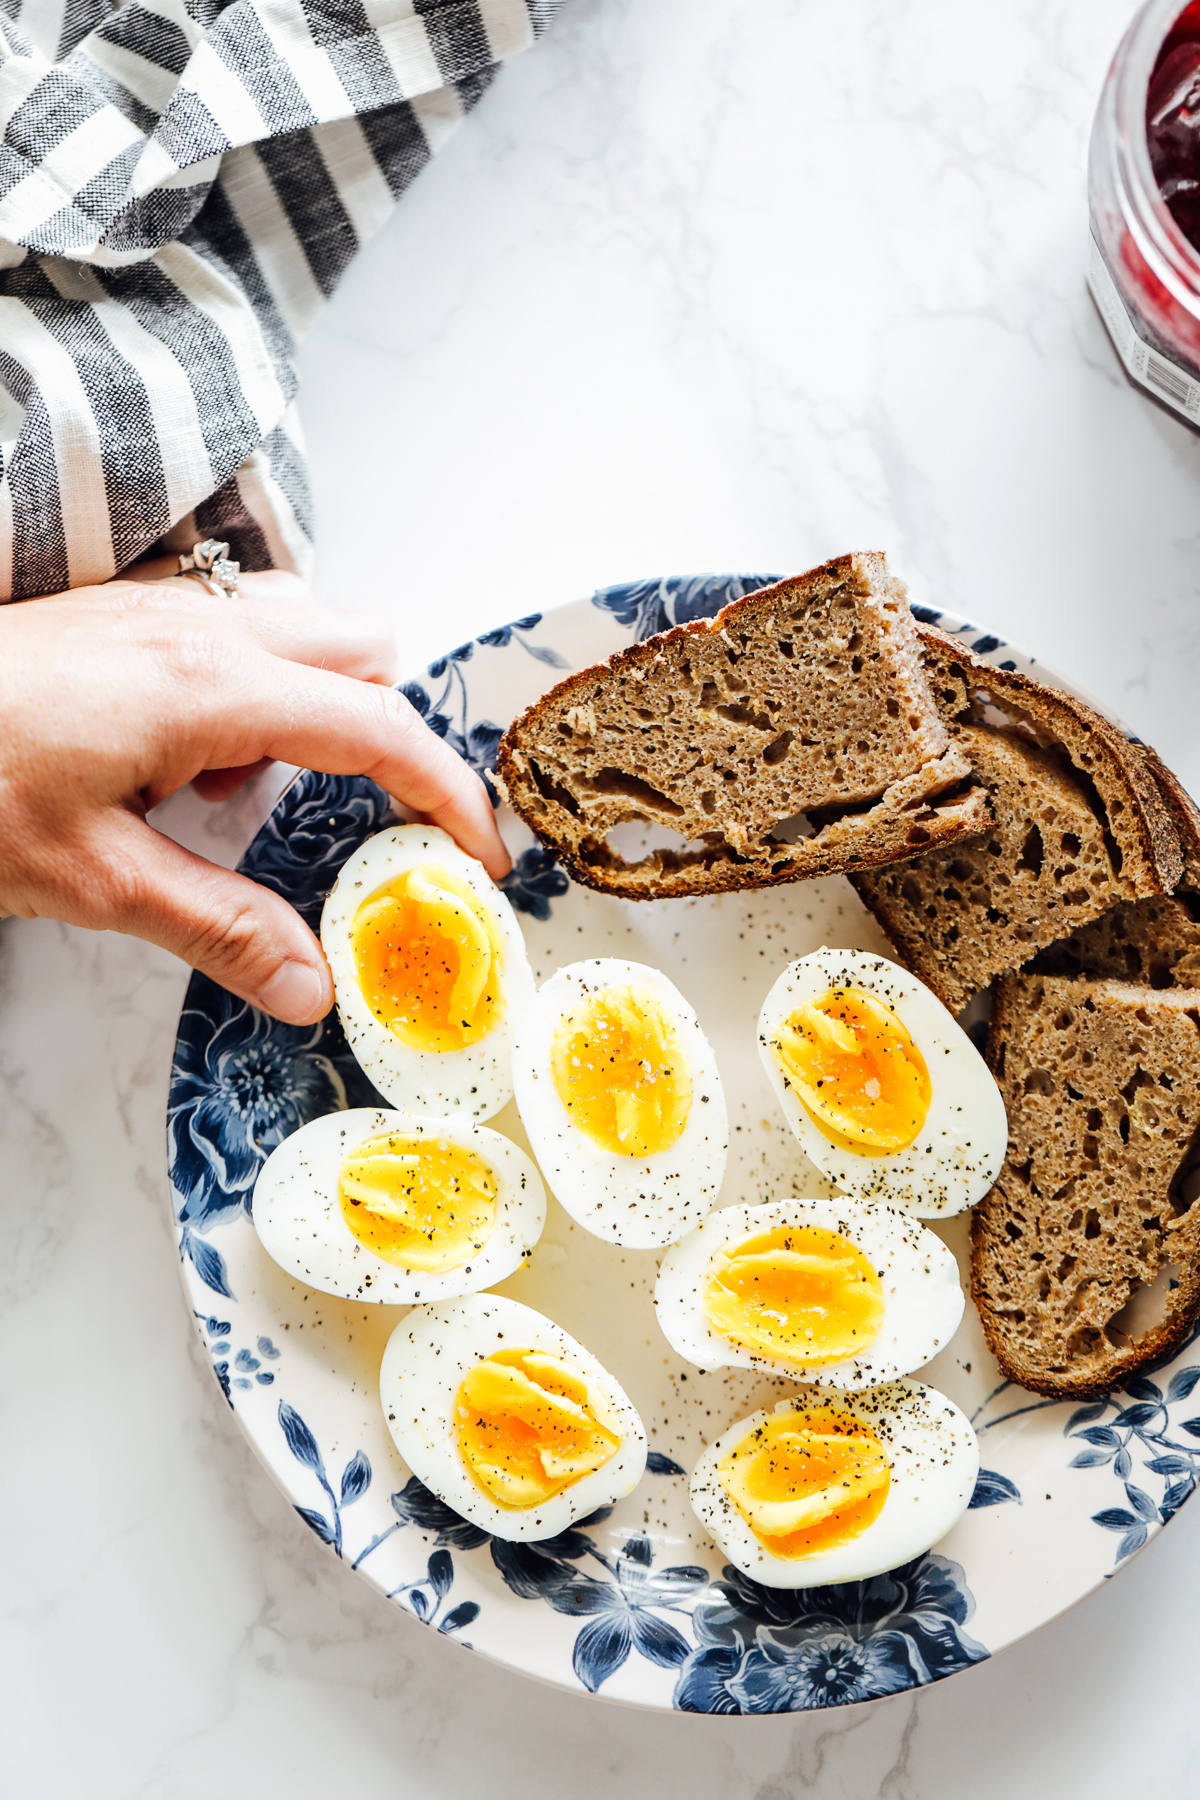 Hard boiled eggs cut in half on a blue and white plate with sourdough bread slices.